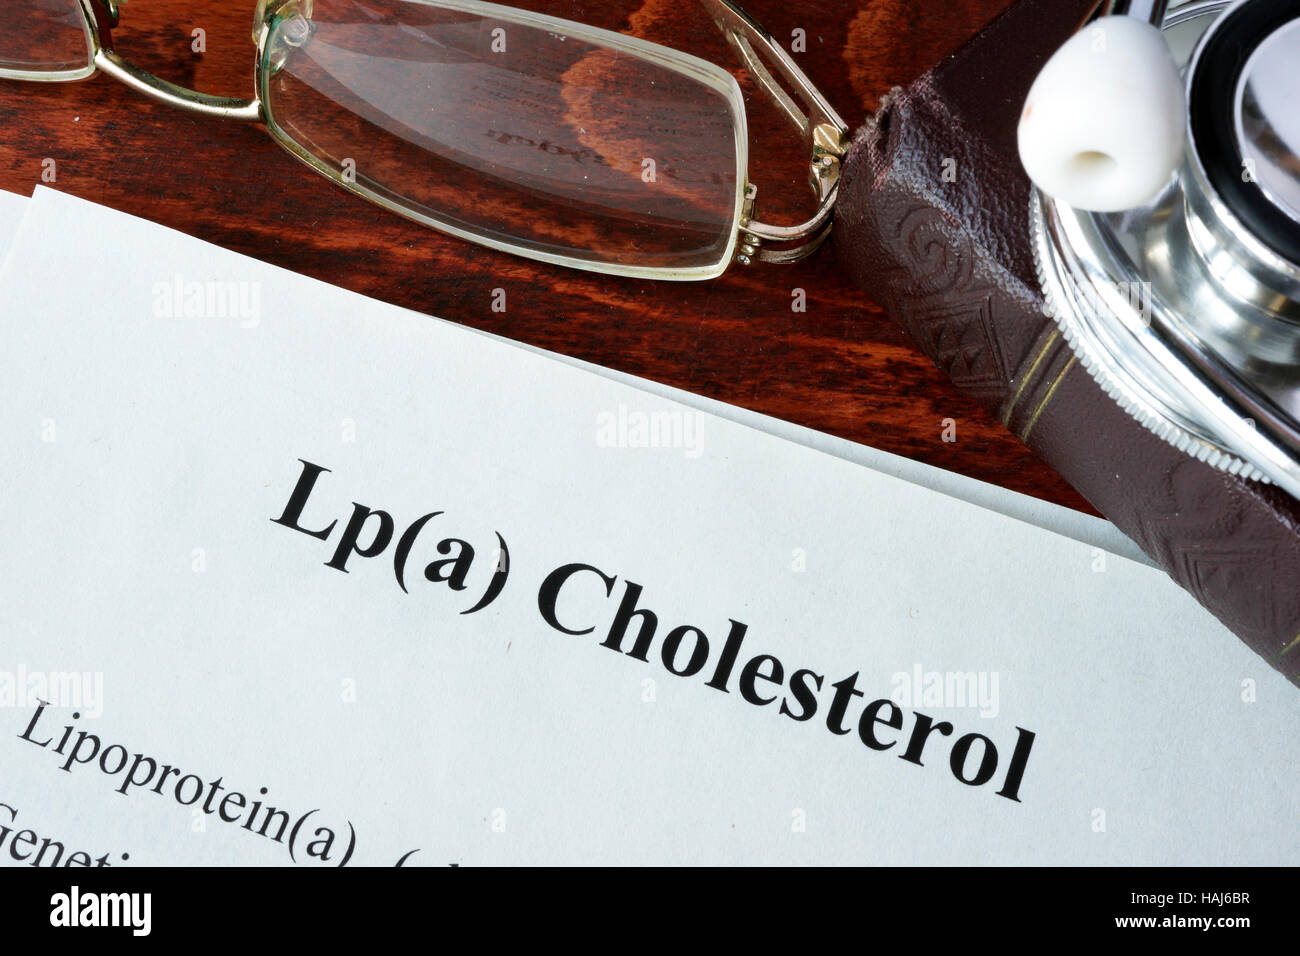 Papers with words Lp(a) Cholesterol on a table. Stock Photo